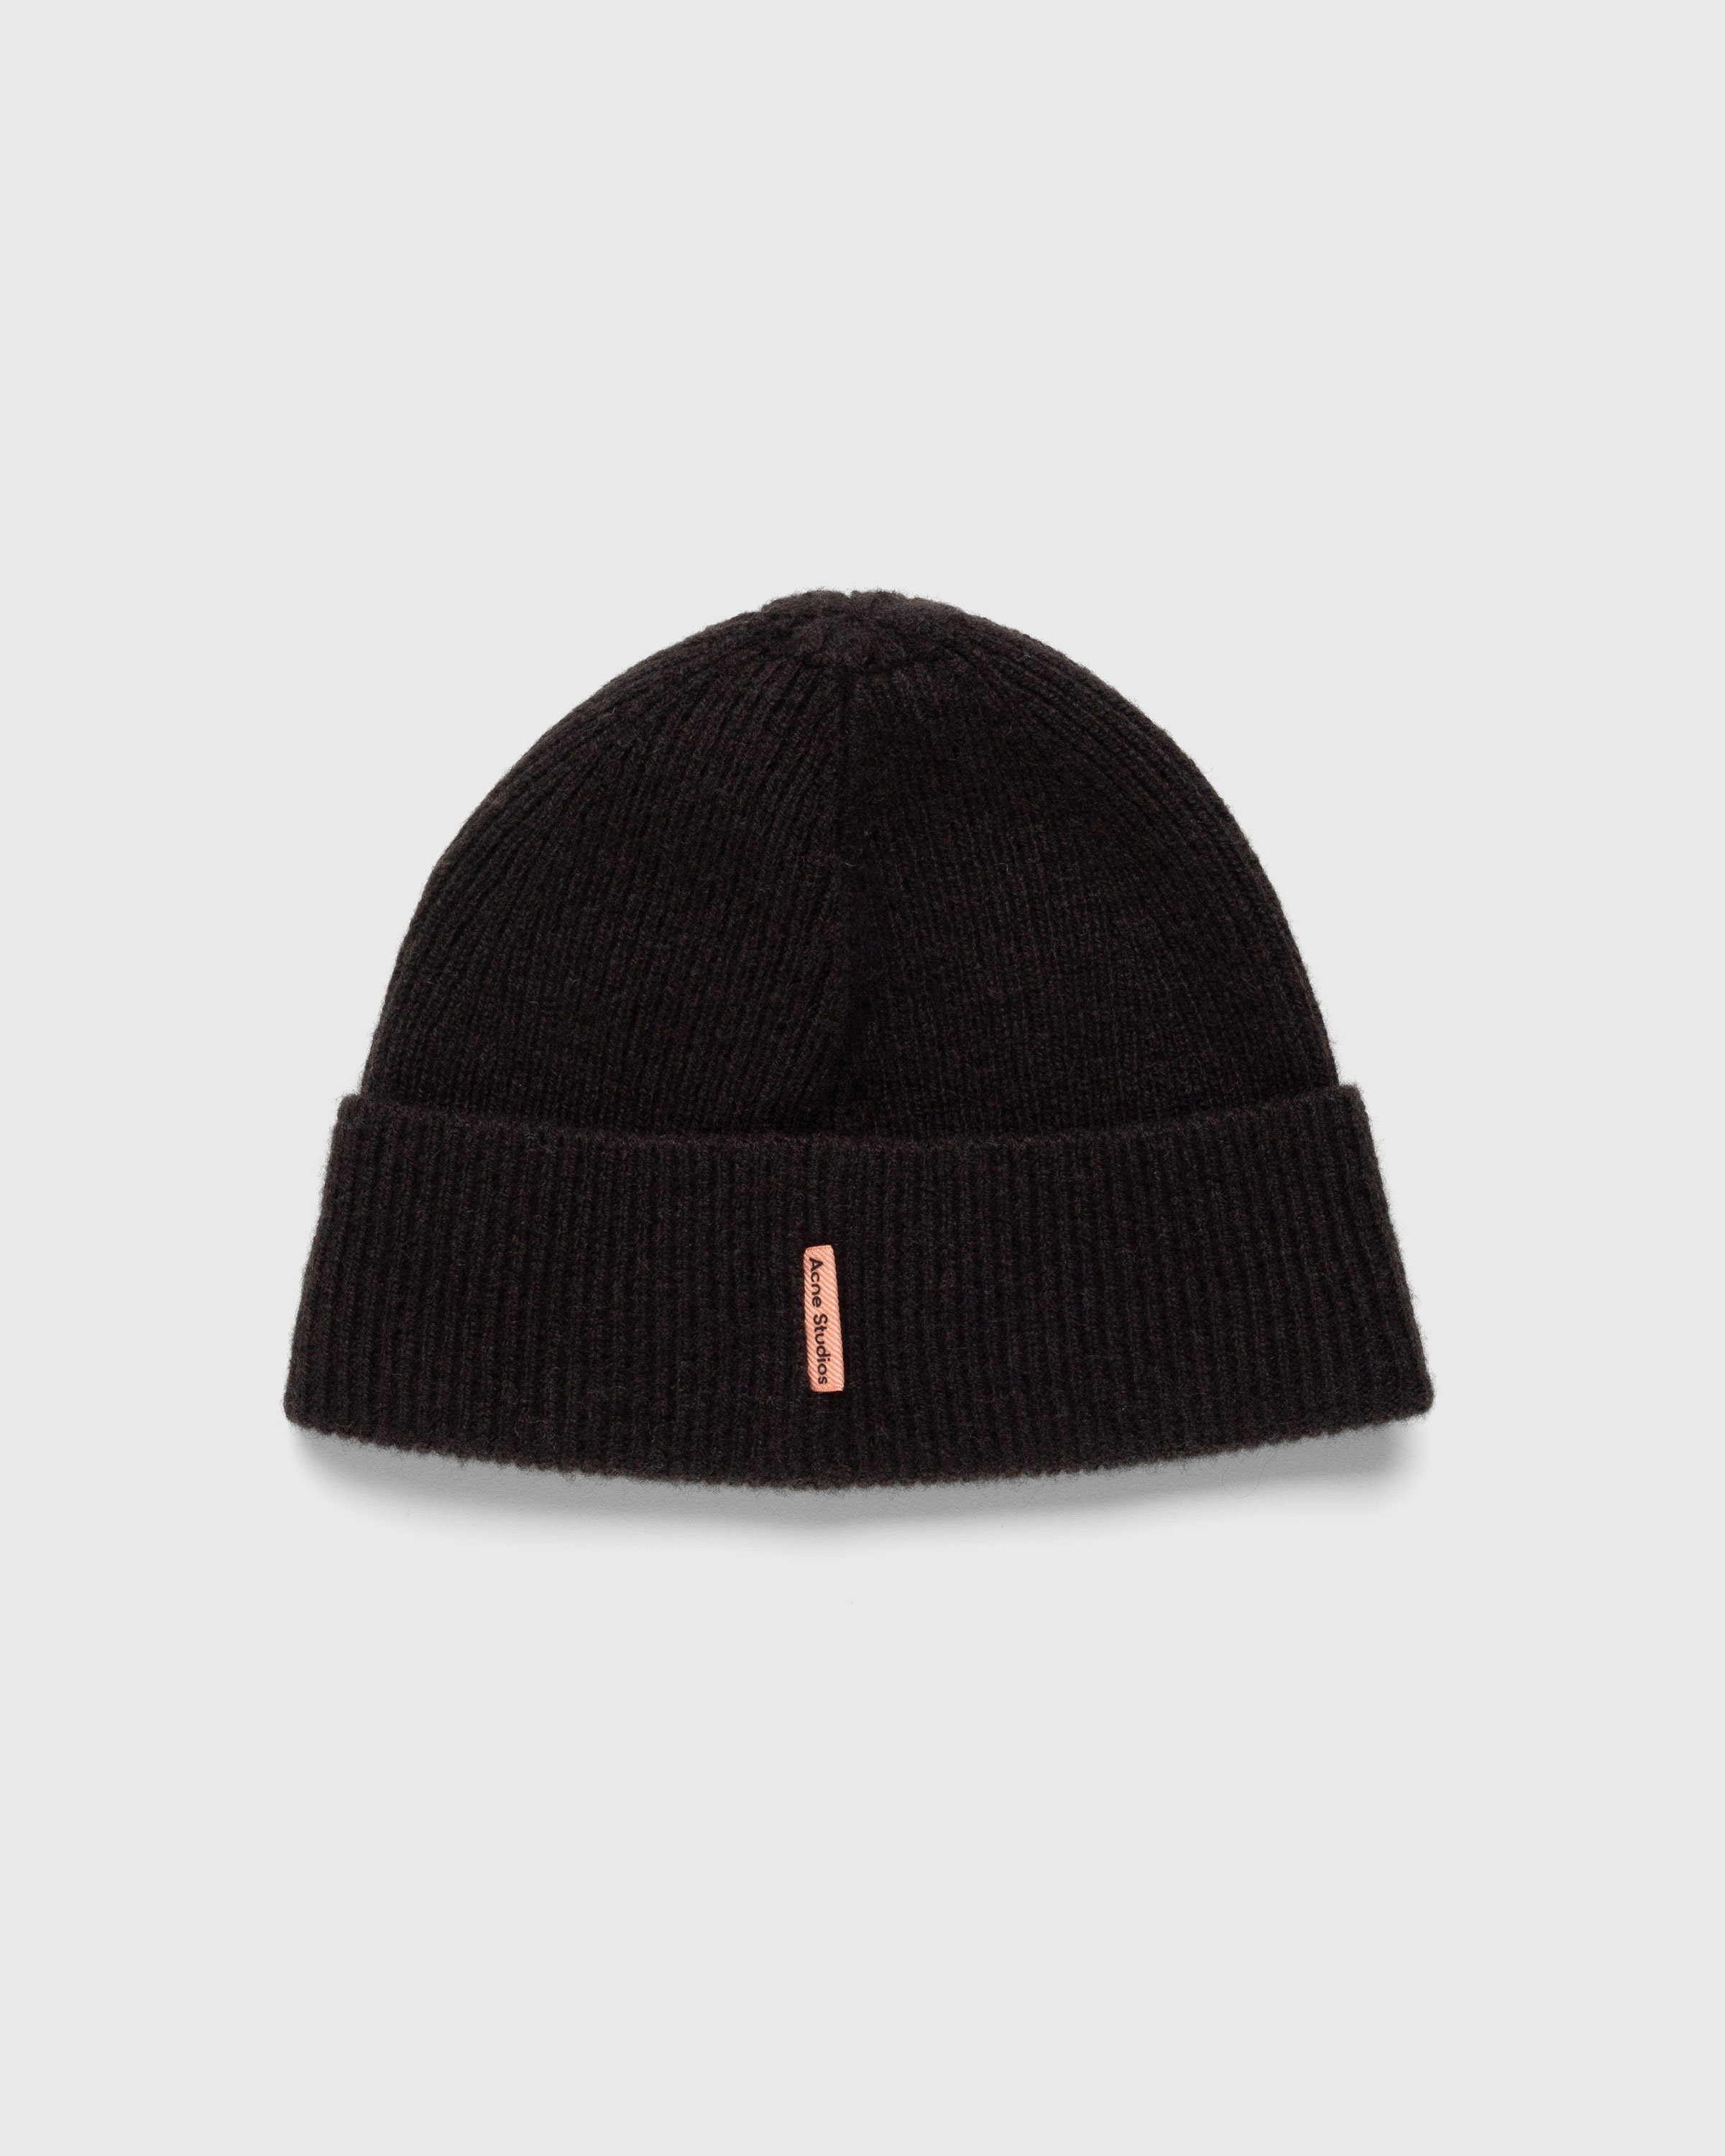 Acne Studios - Wool Cashmere Beanie Brown - Accessories - Brown - Image 1